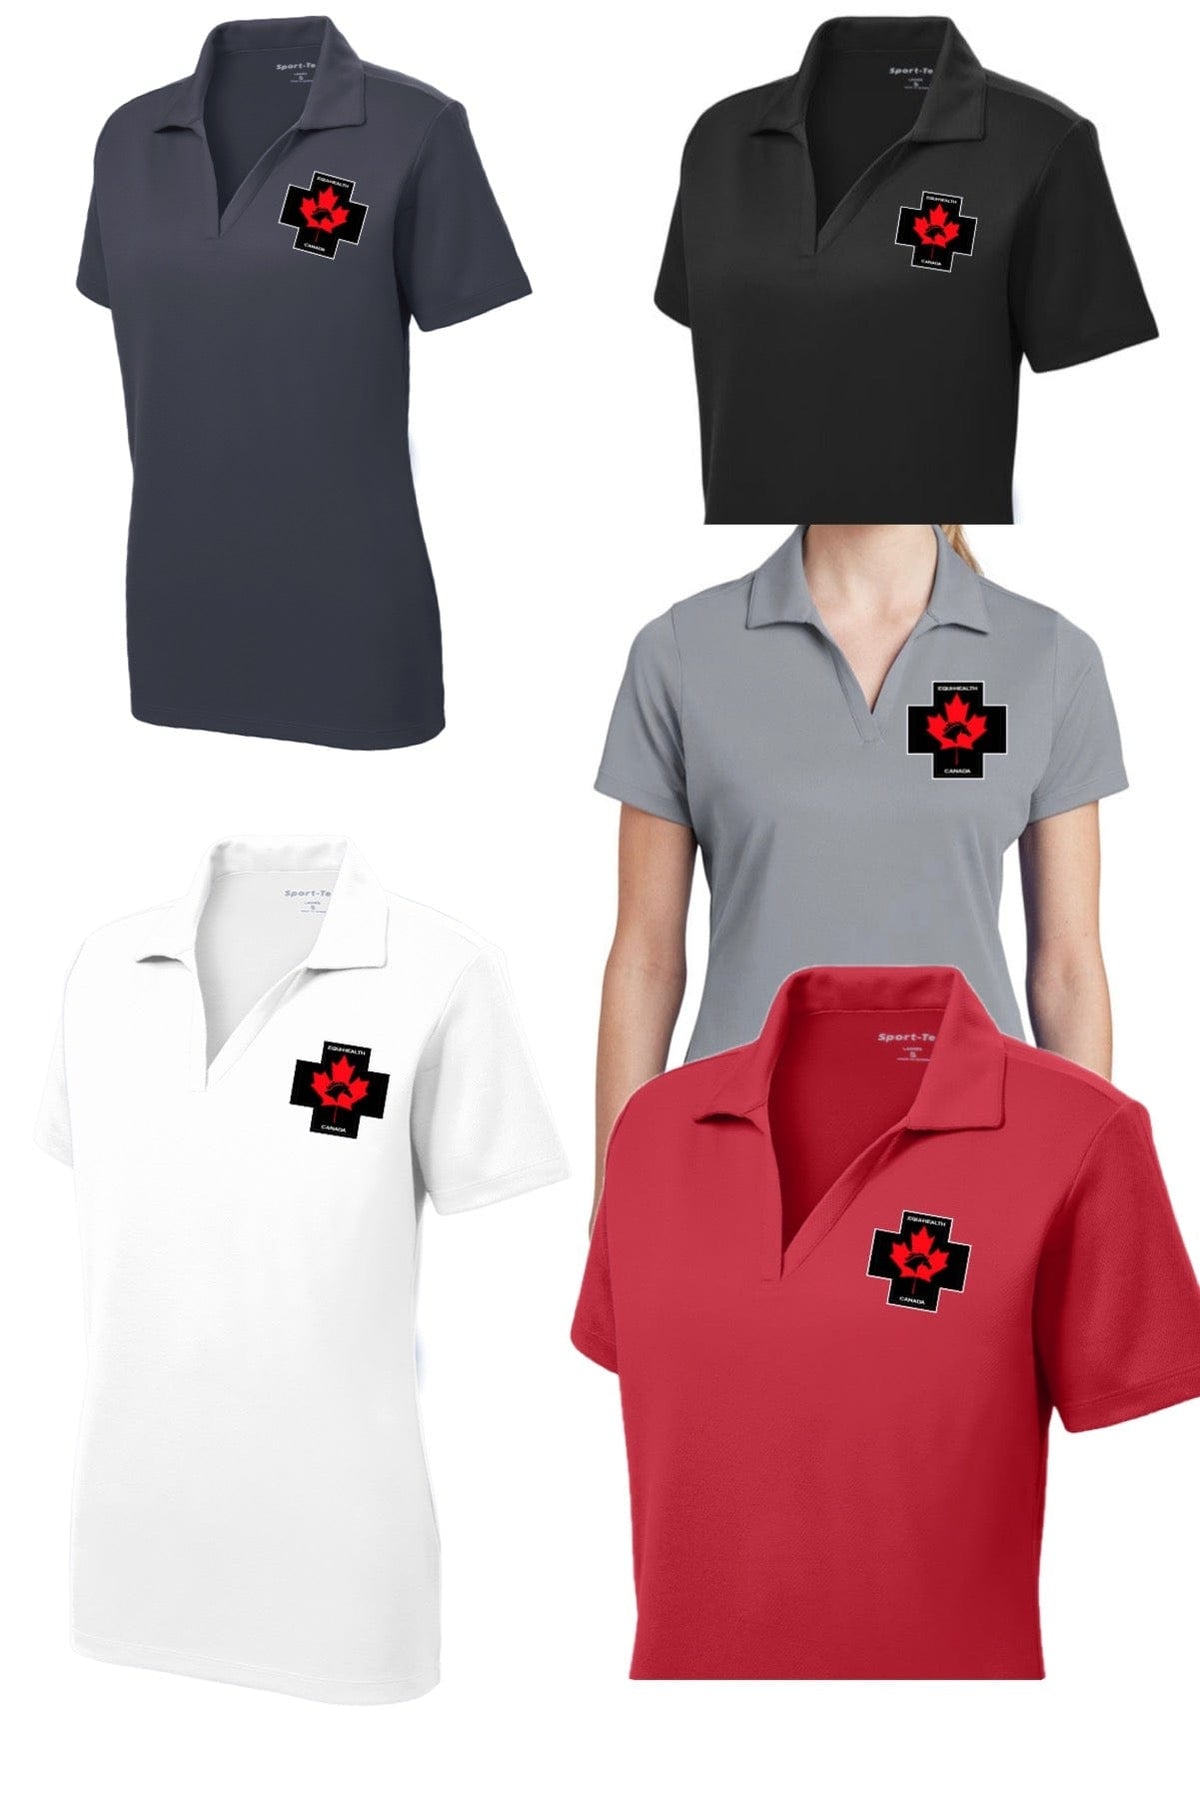 Equestrian Team Apparel Equi-Health Canada Polo Shirts equestrian team apparel online tack store mobile tack store custom farm apparel custom show stable clothing equestrian lifestyle horse show clothing riding clothes horses equestrian tack store